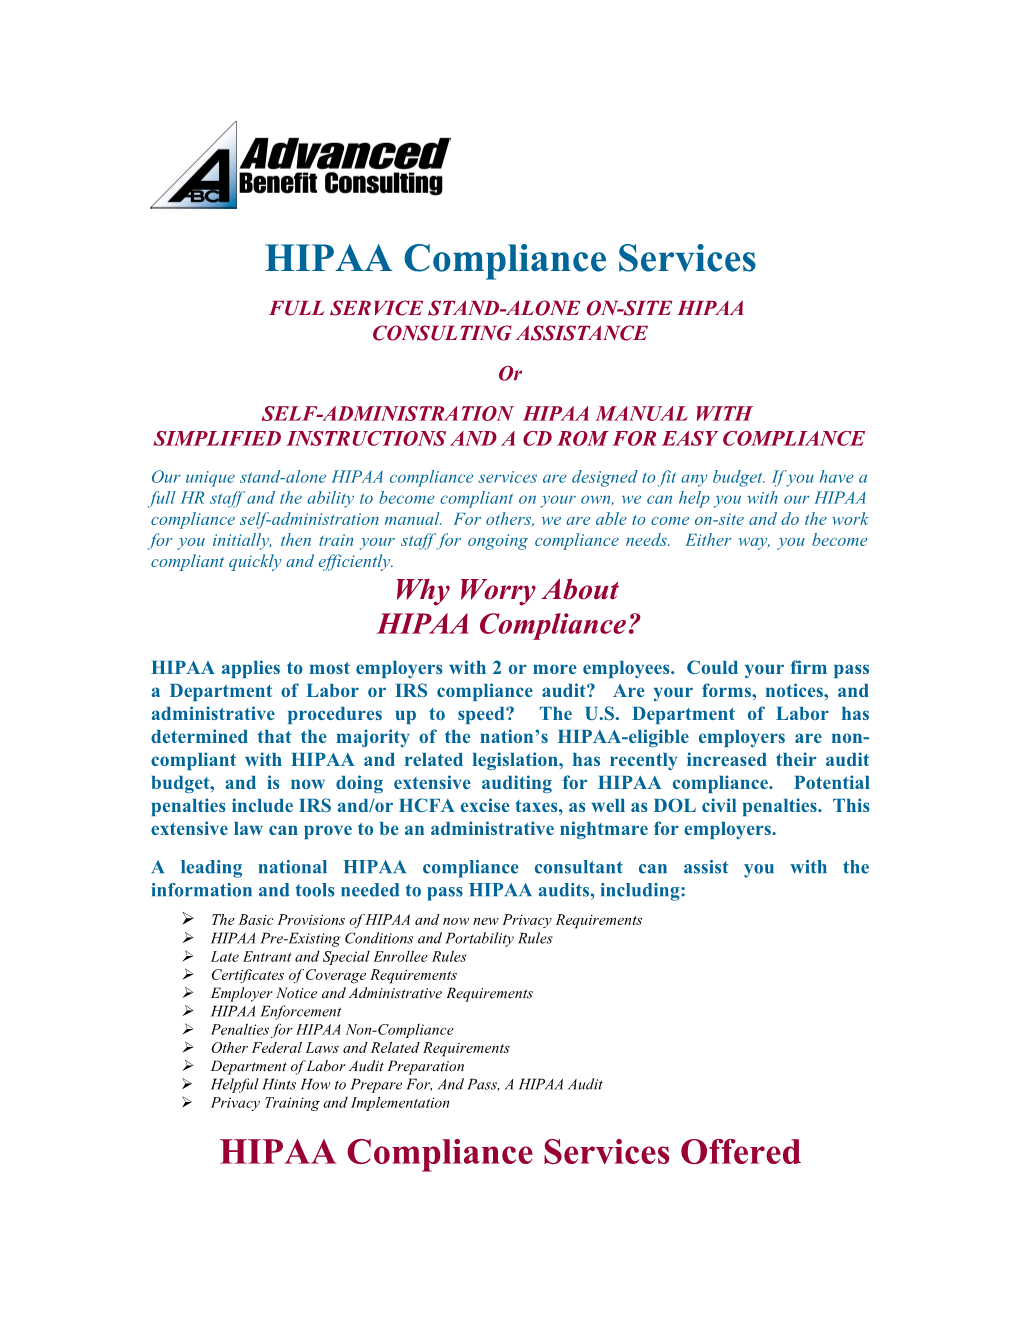 Full Service Stand-Alone On-Site Hipaa